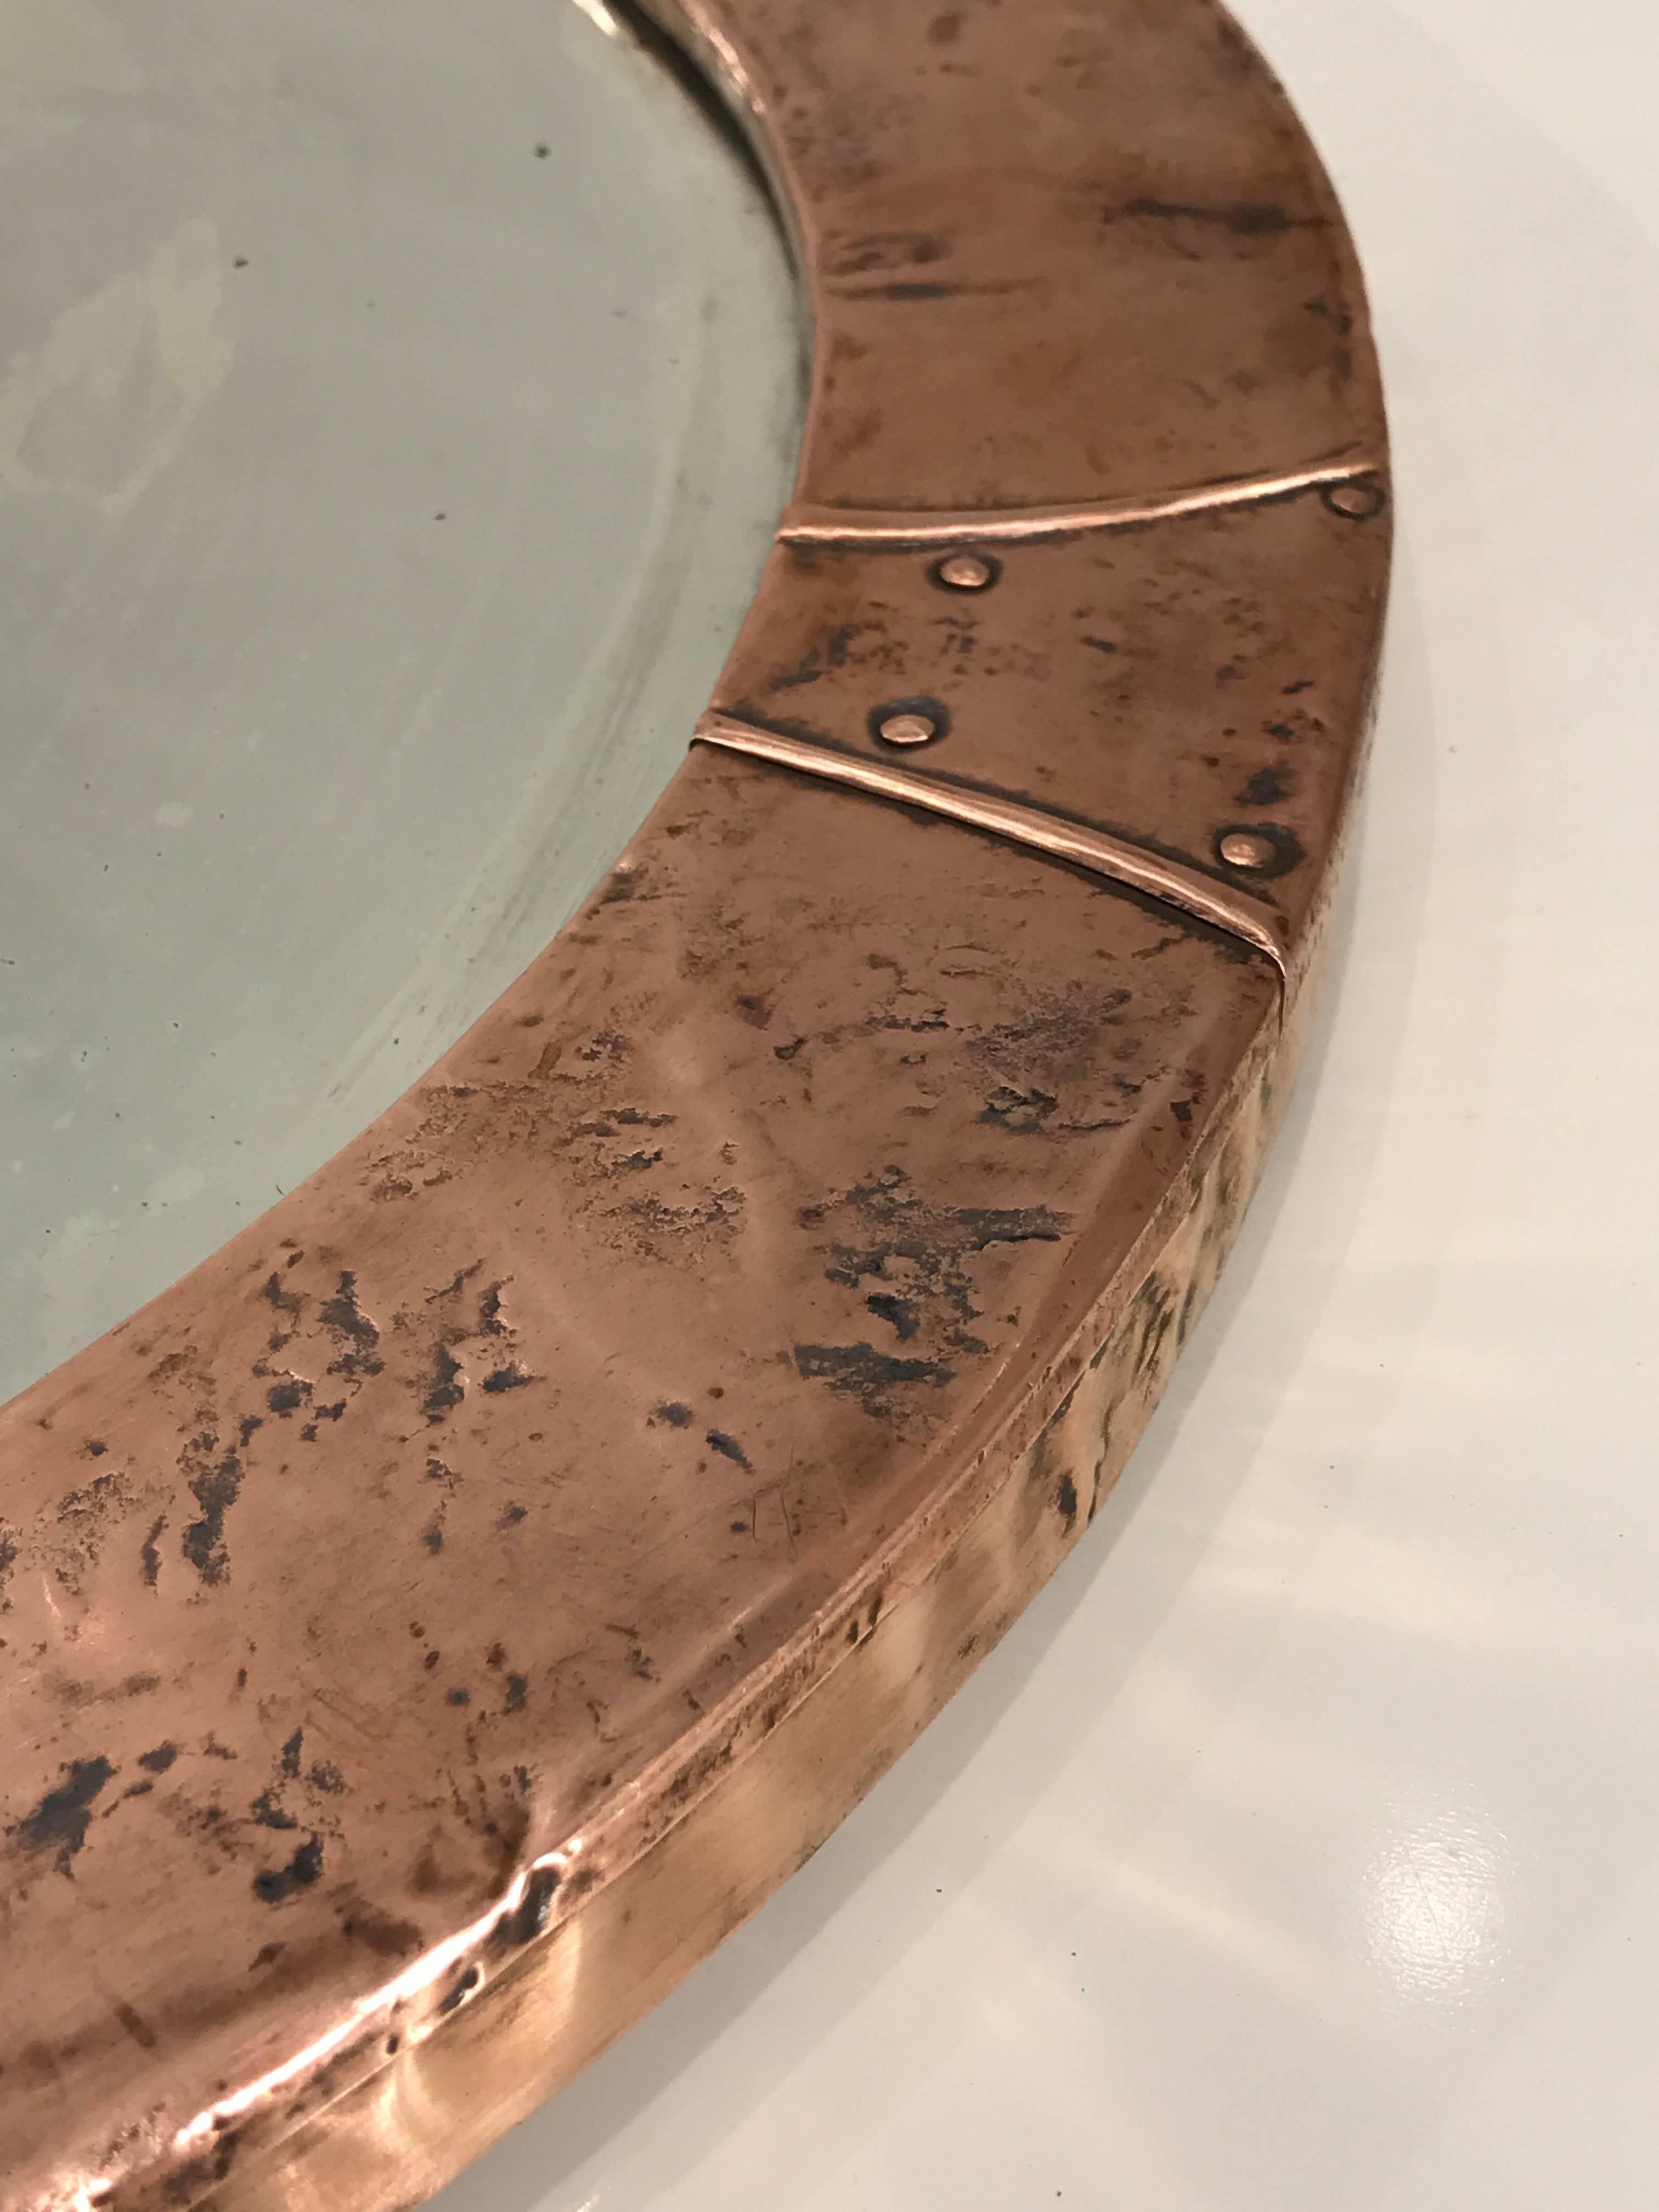 hammered copper mirrors